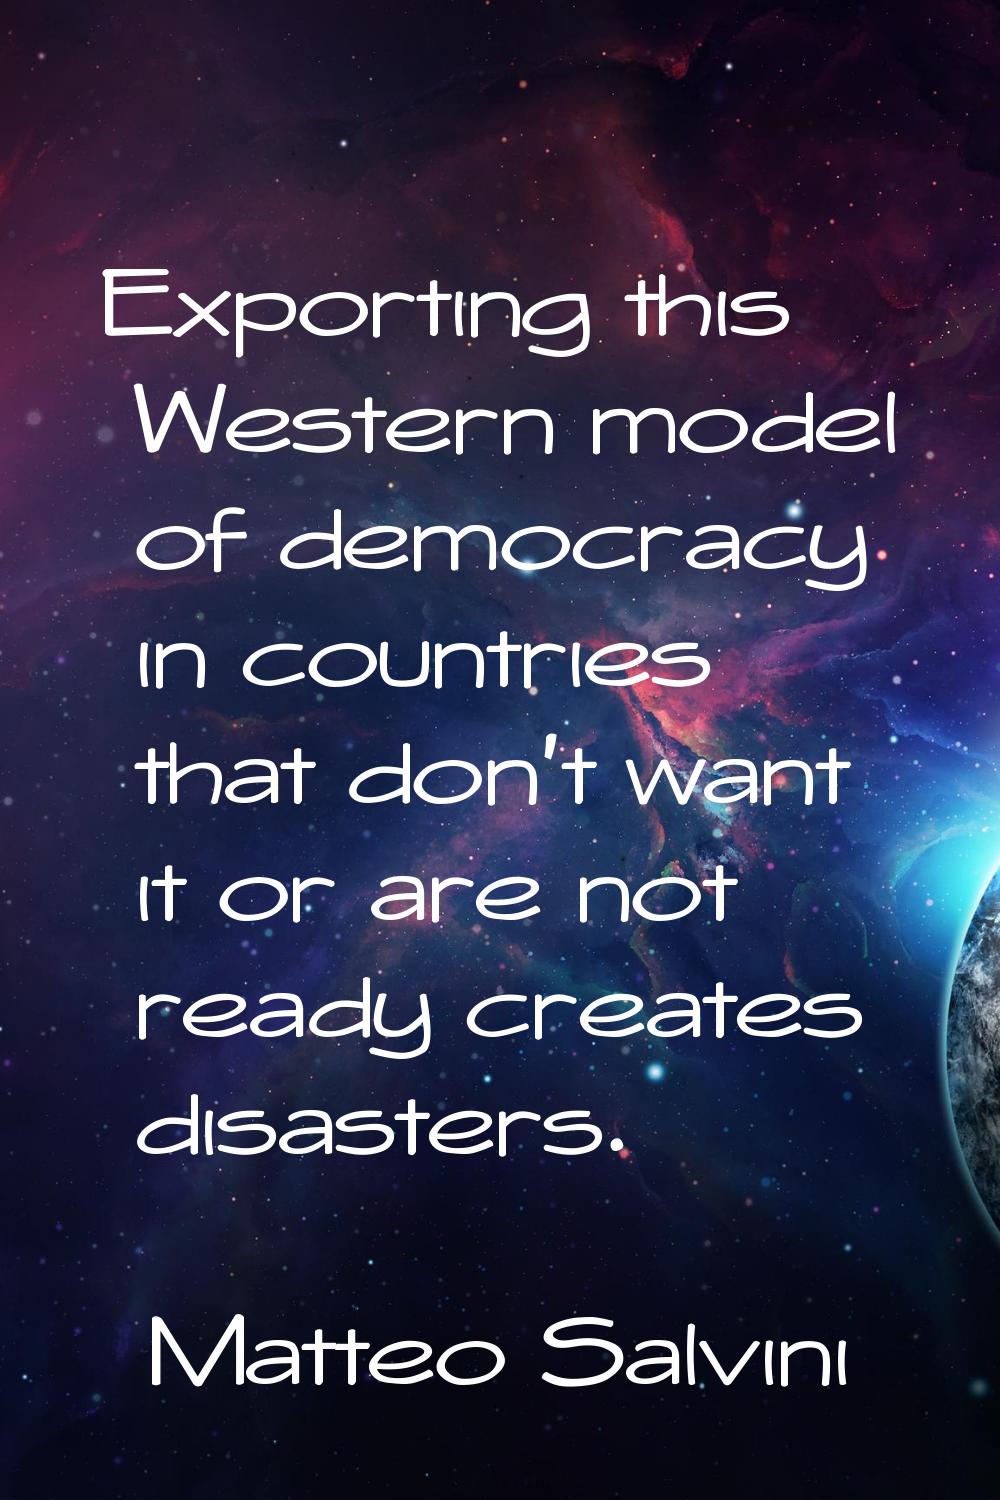 Exporting this Western model of democracy in countries that don't want it or are not ready creates 